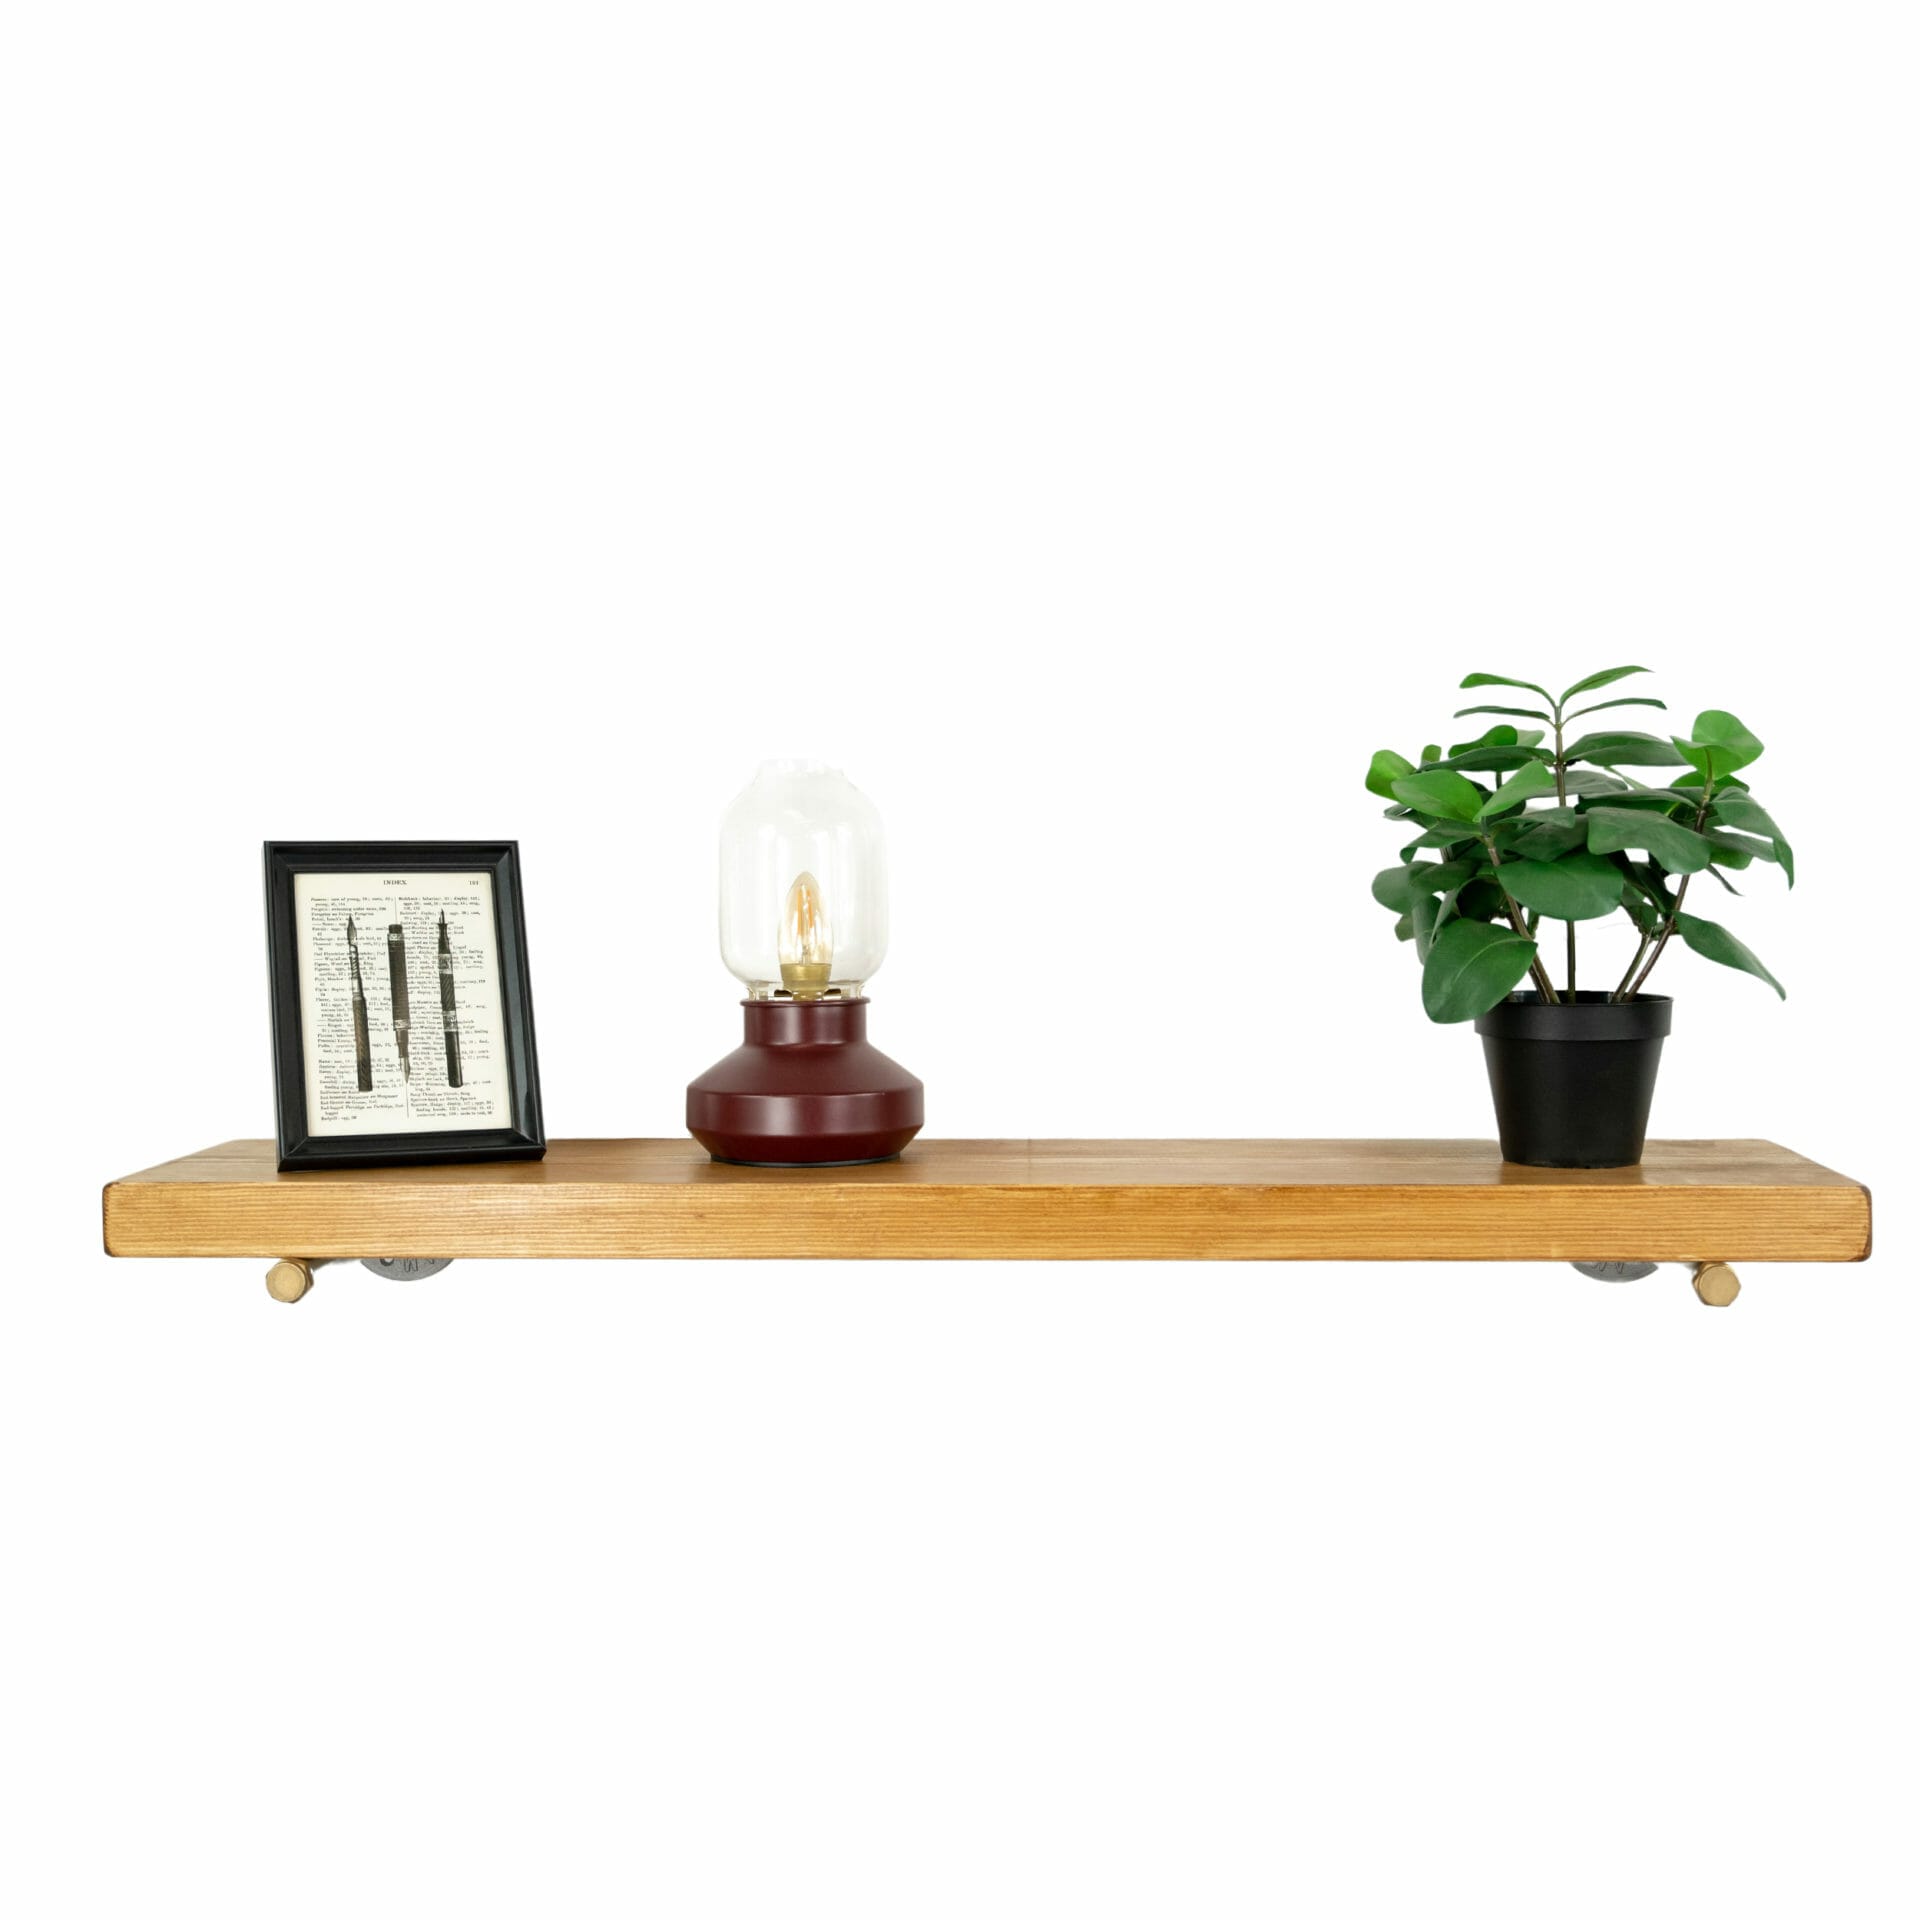 Industrial Silver and brass floating shelf bracket front holding shelf and items